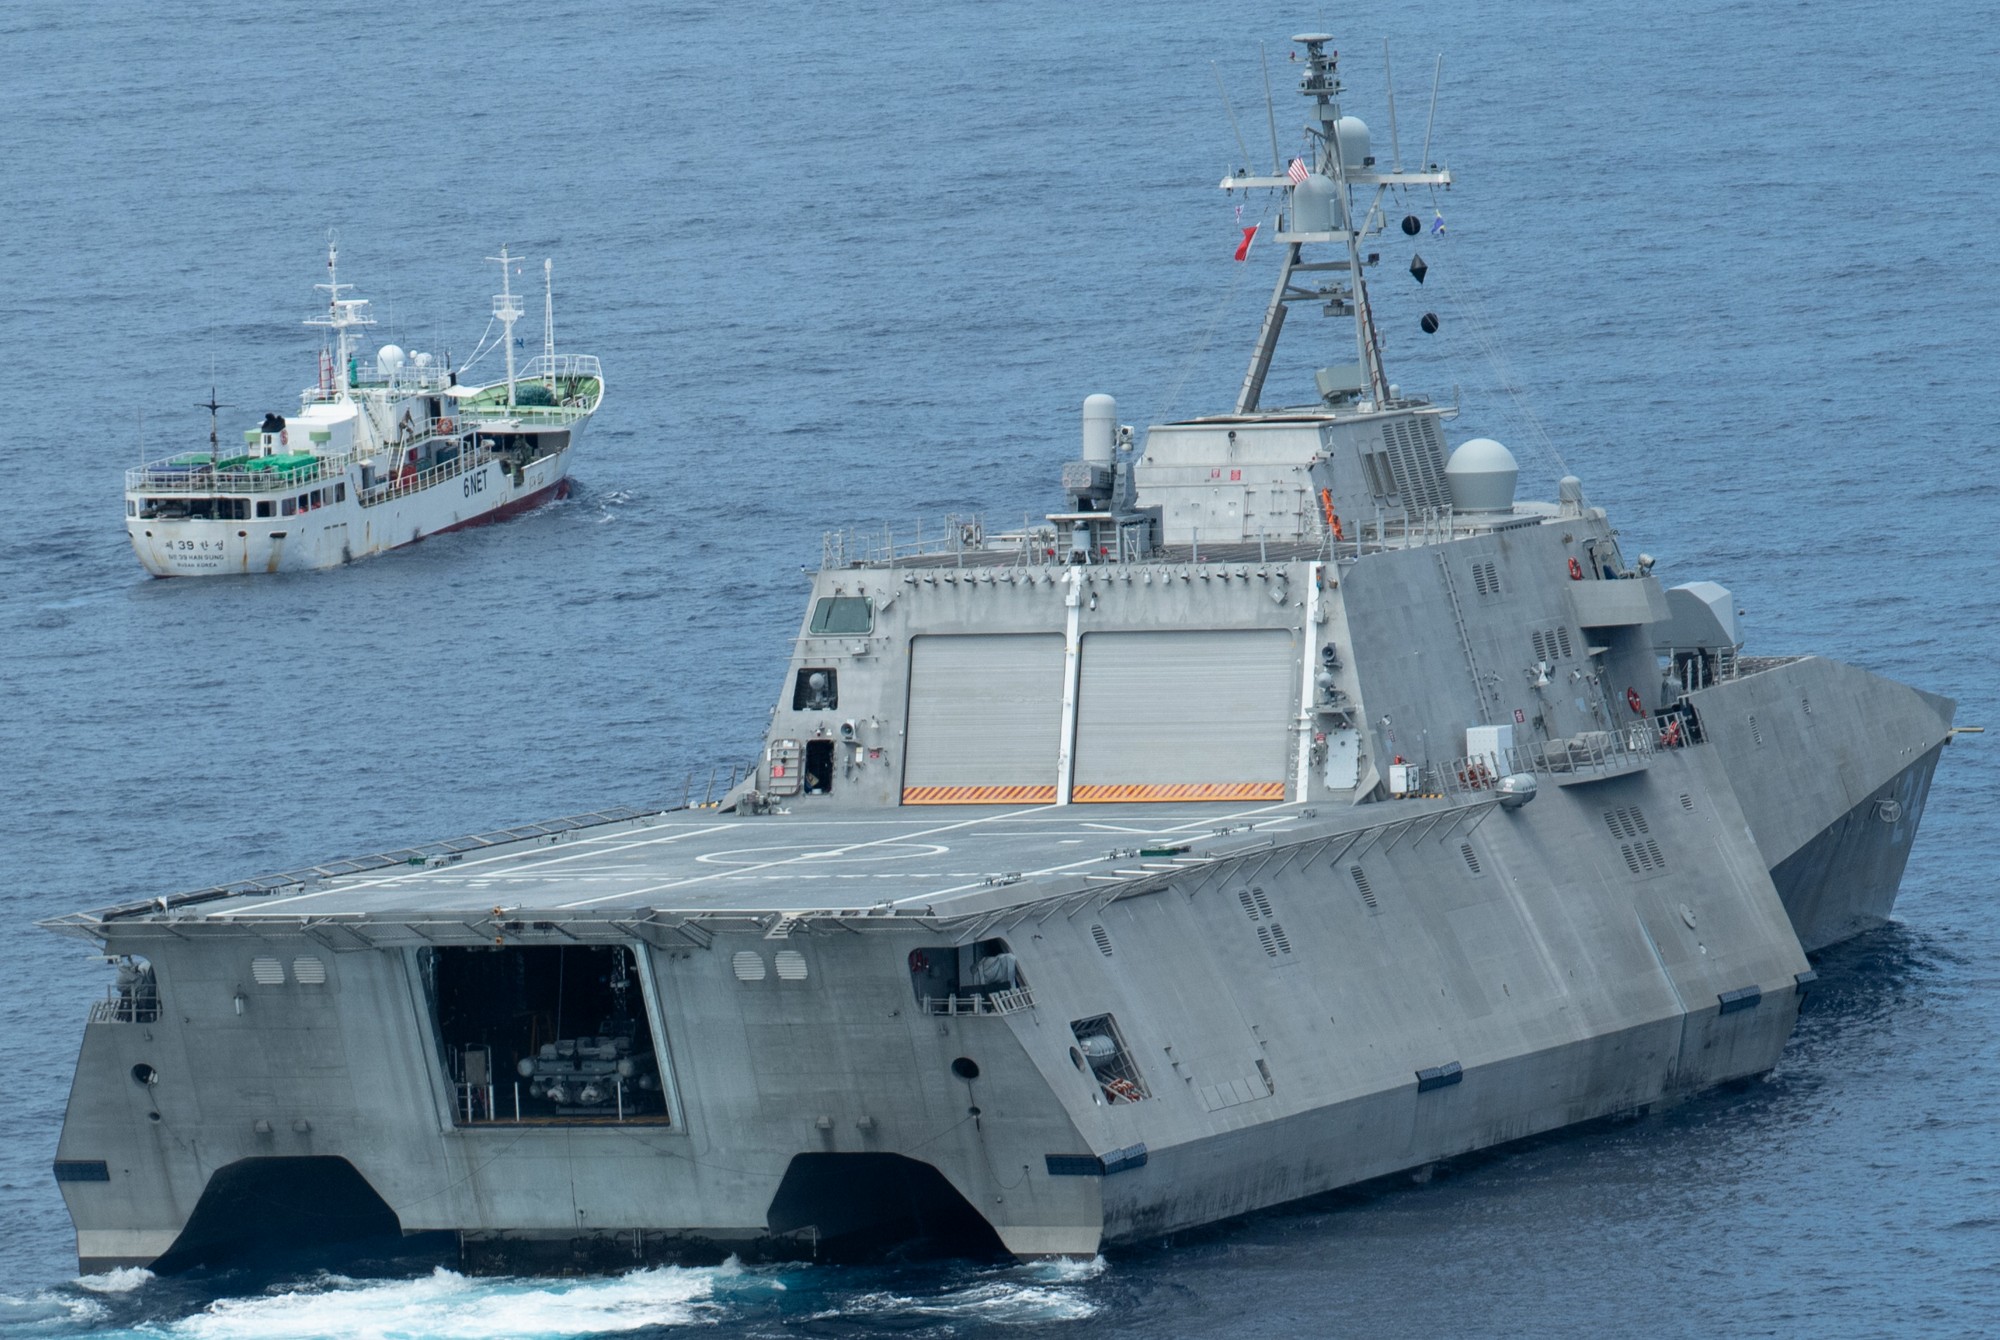 lcs-24 uss oakland independence class littoral combat ship us navy pacific ocean 14